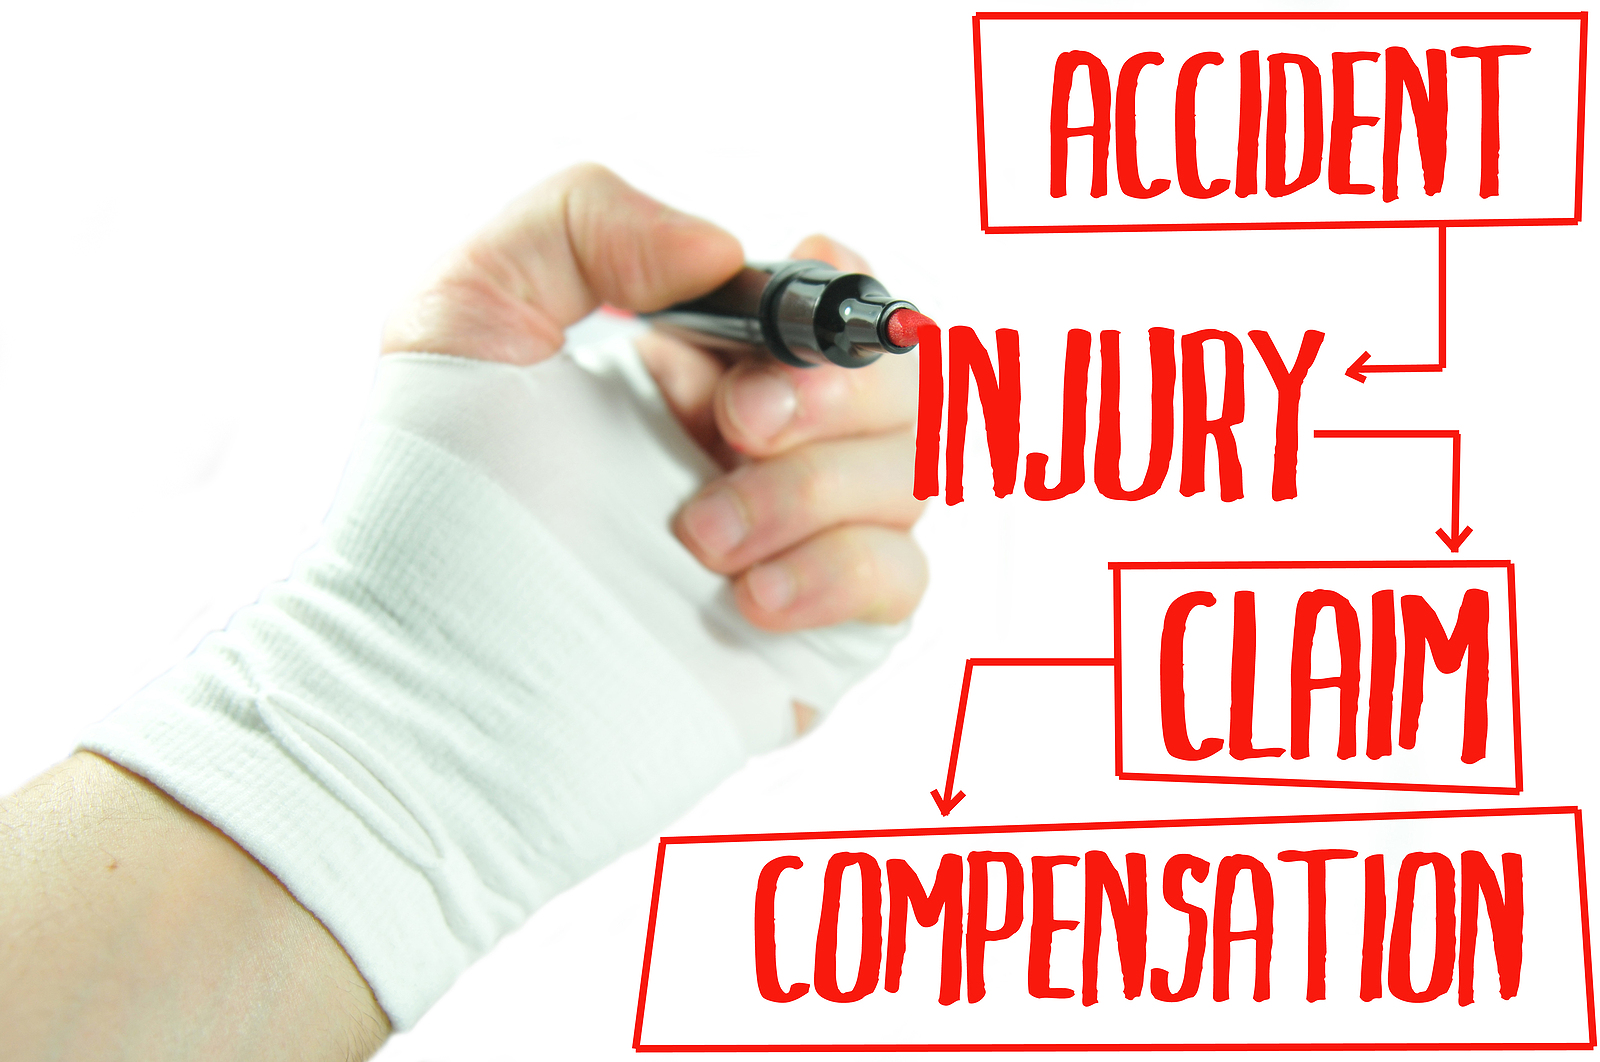 workers compensation attorney near me